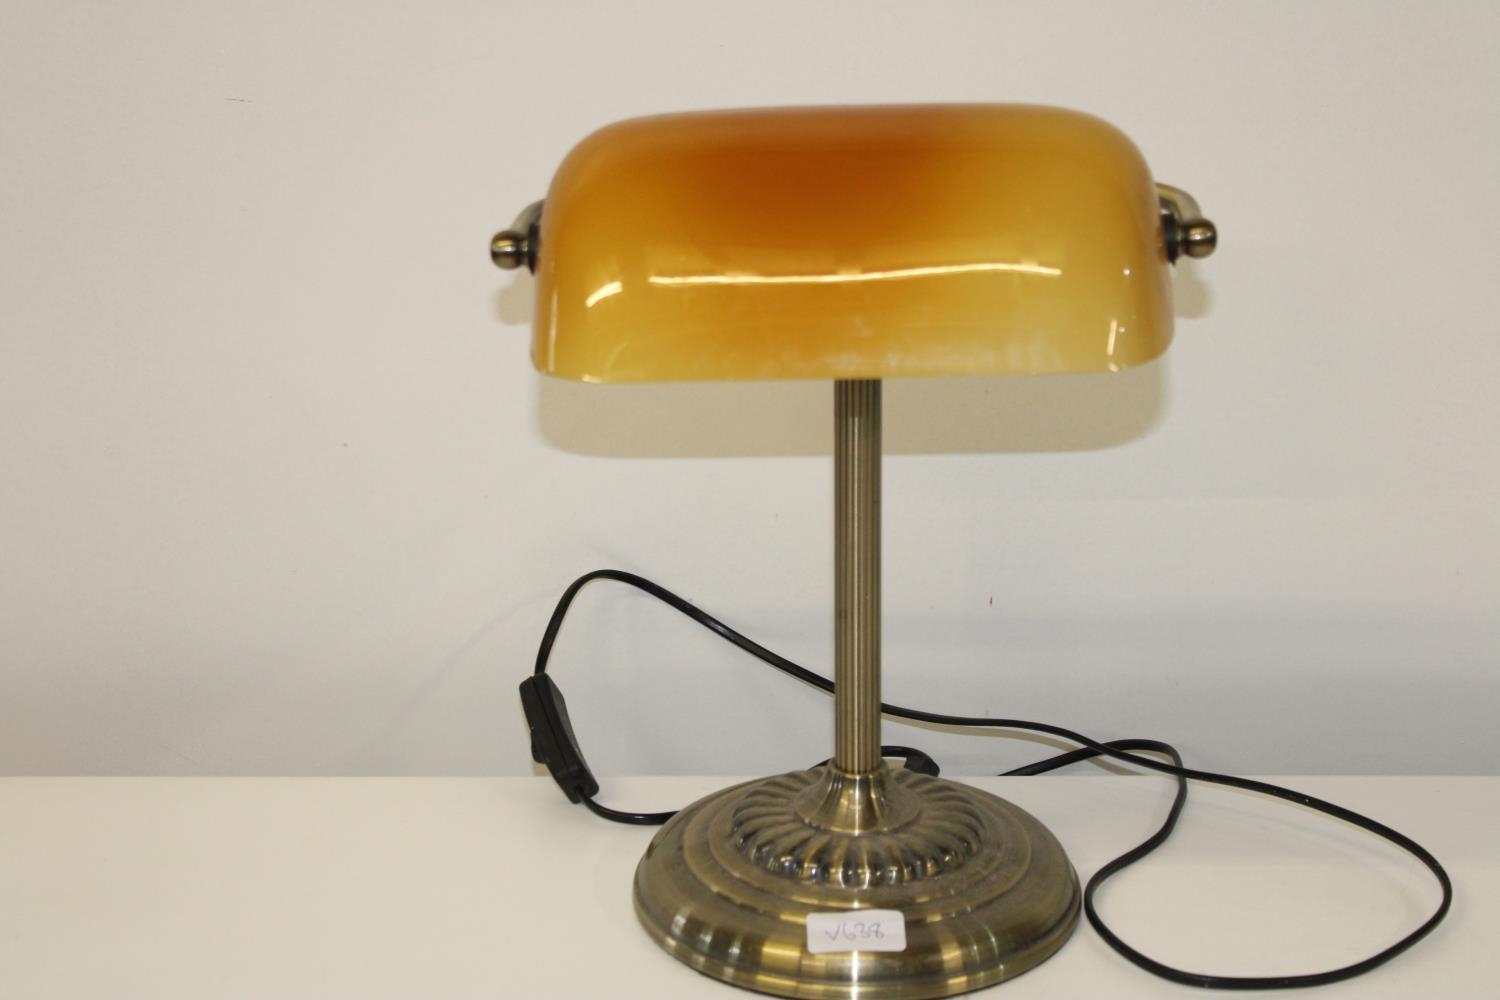 A vintage style bankers lamp